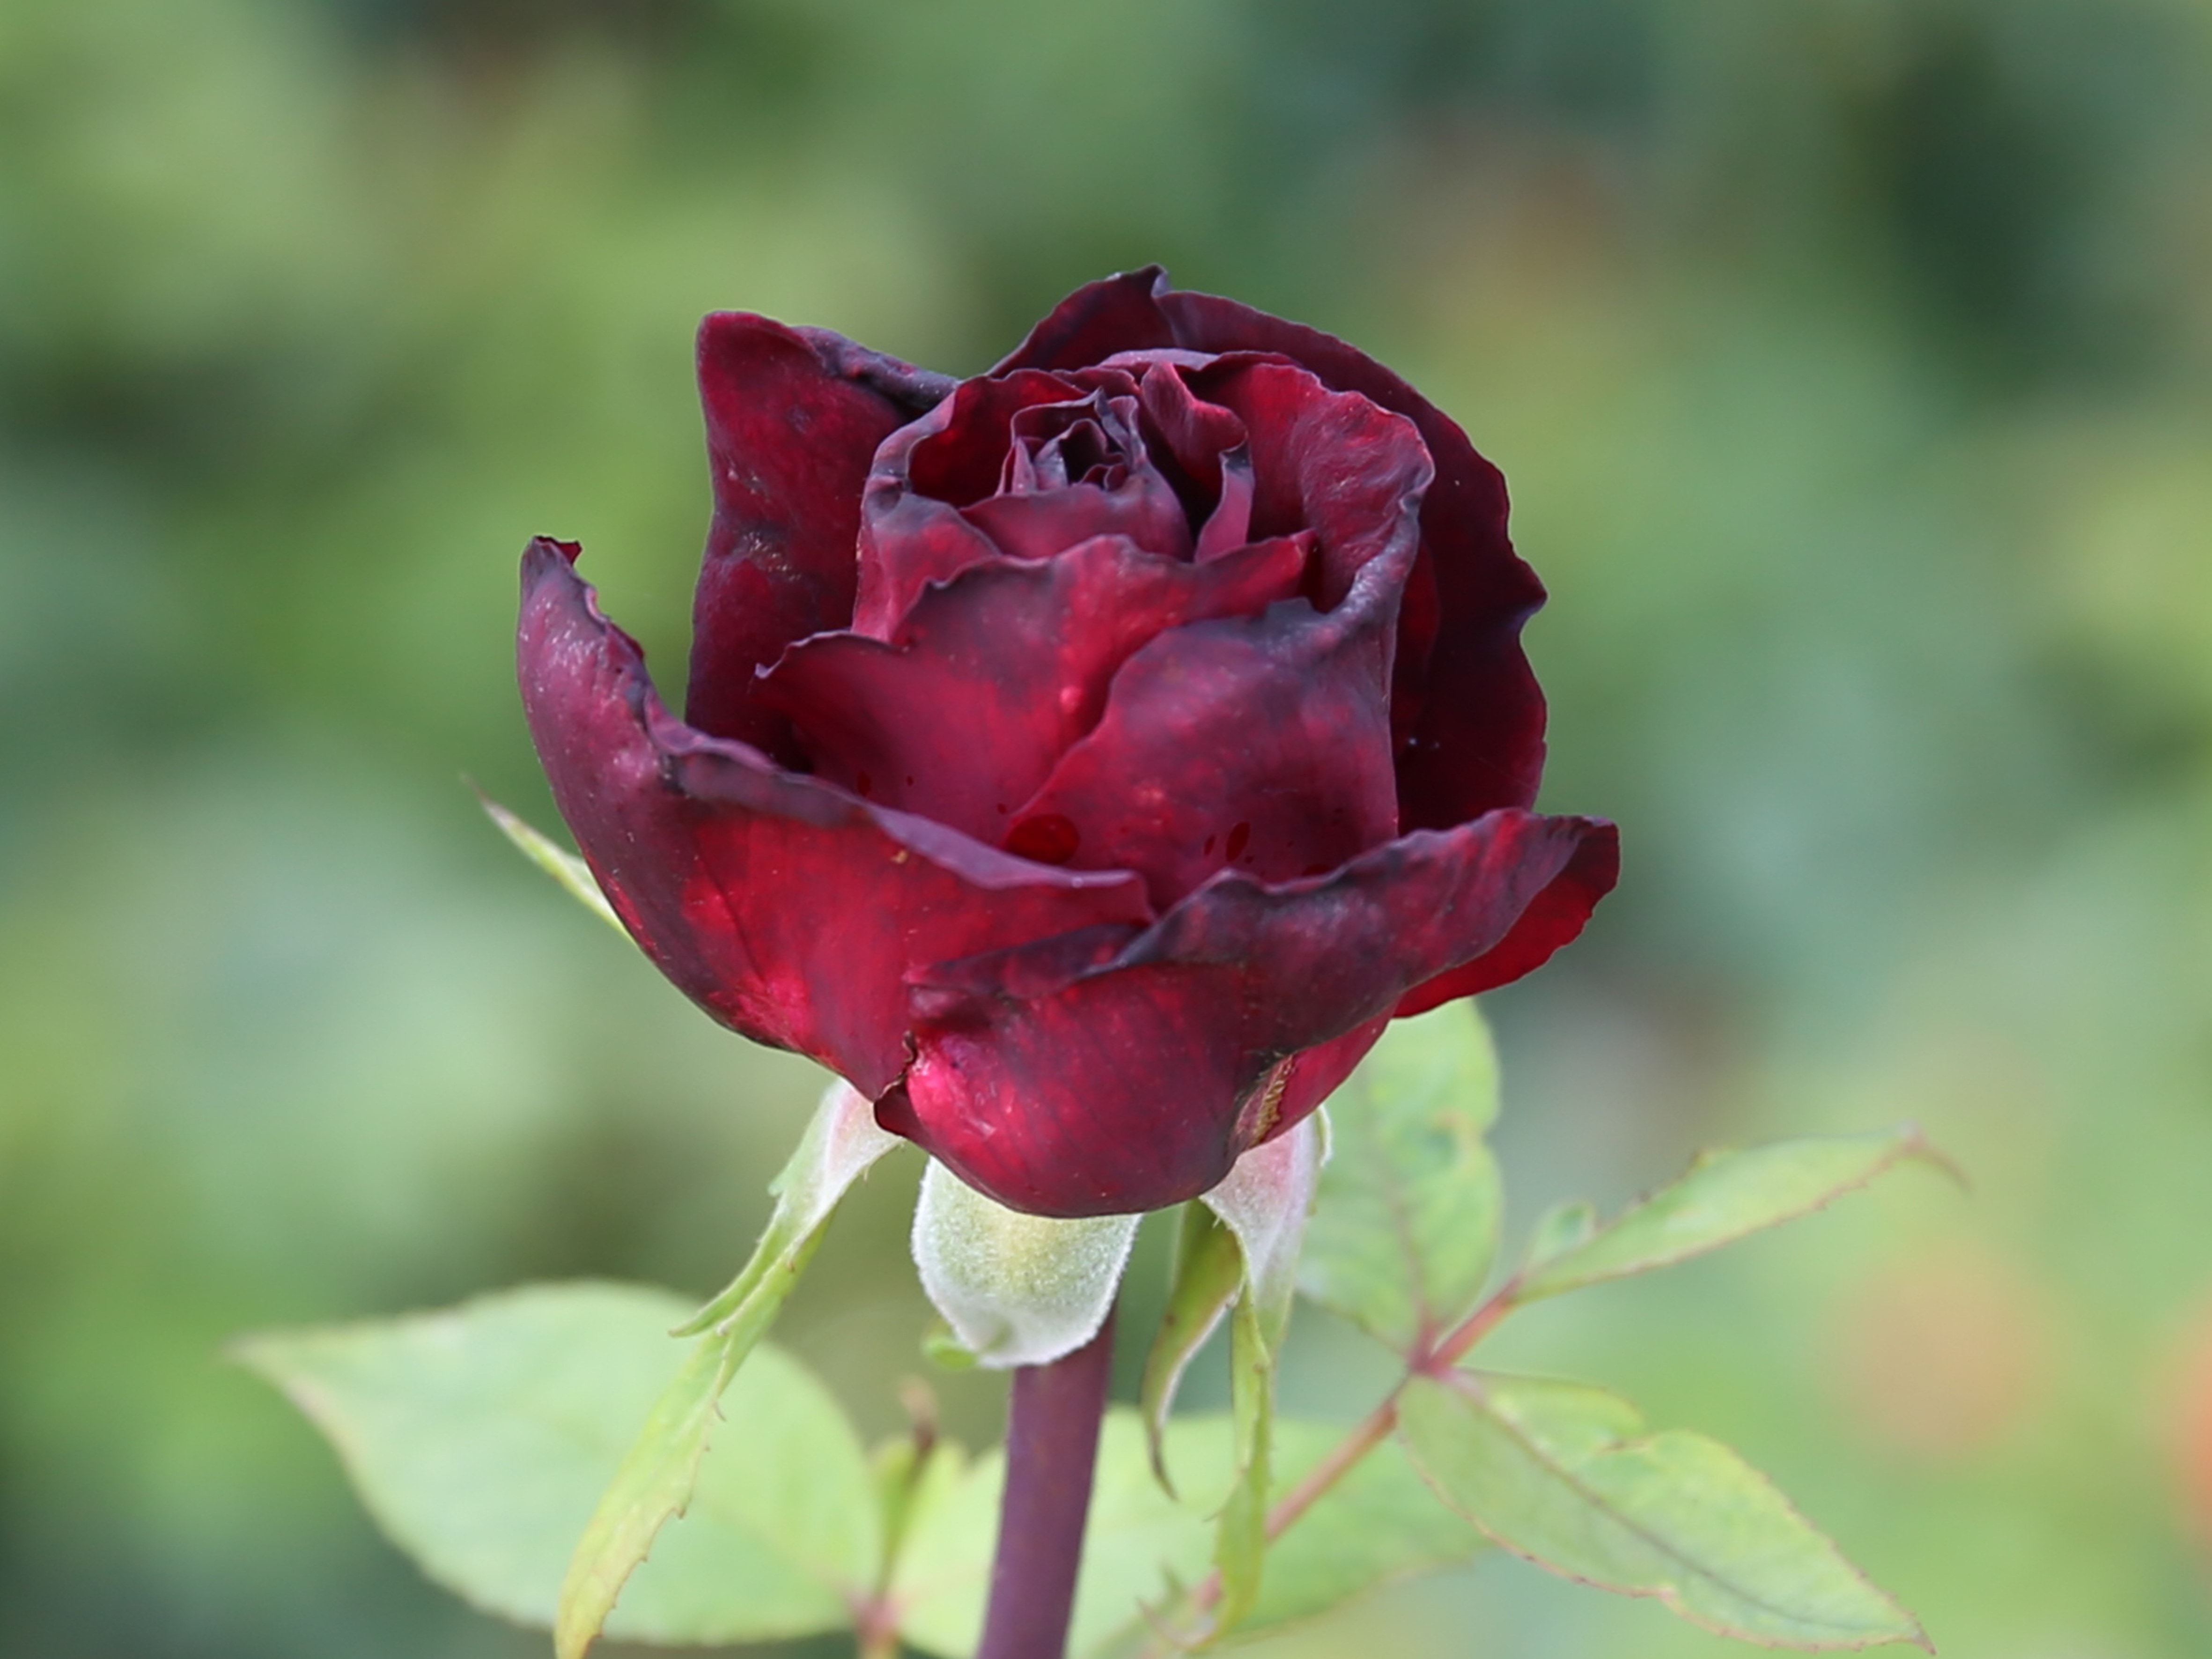 3840x2160 wallpaper | focus photography of red rose | Peakpx